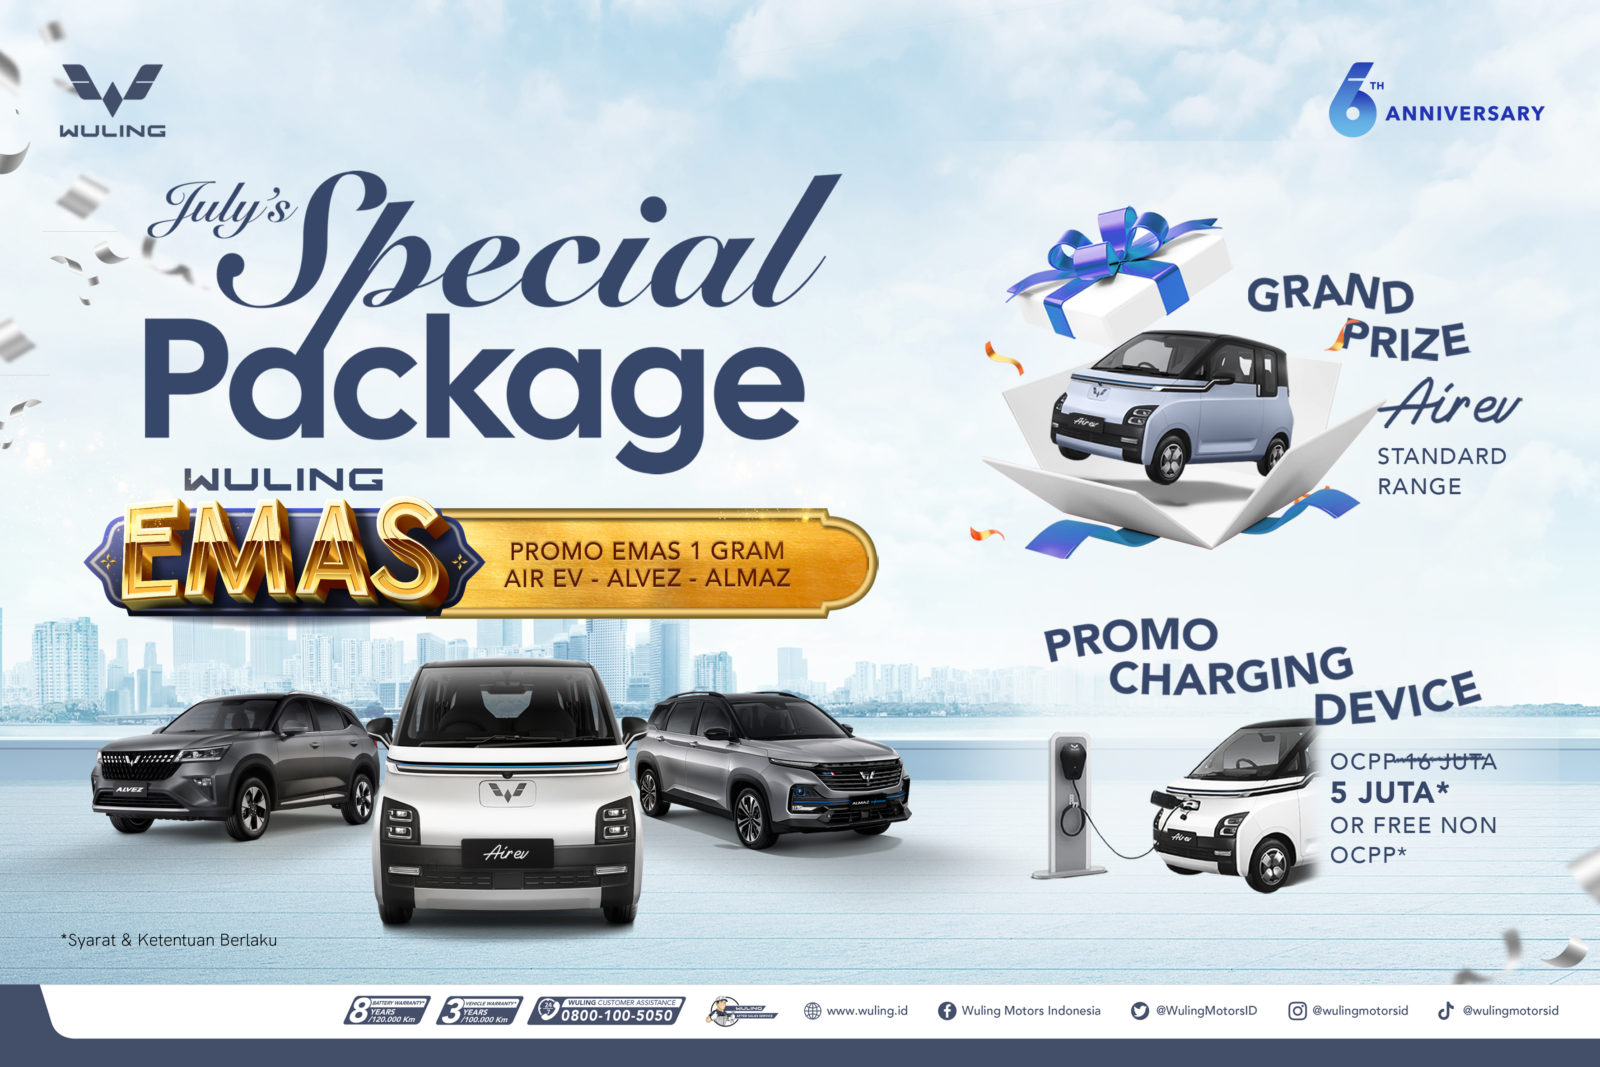 Image Wuling ‘July’s Special Package’, Sales Program With Gold and Car Prizes